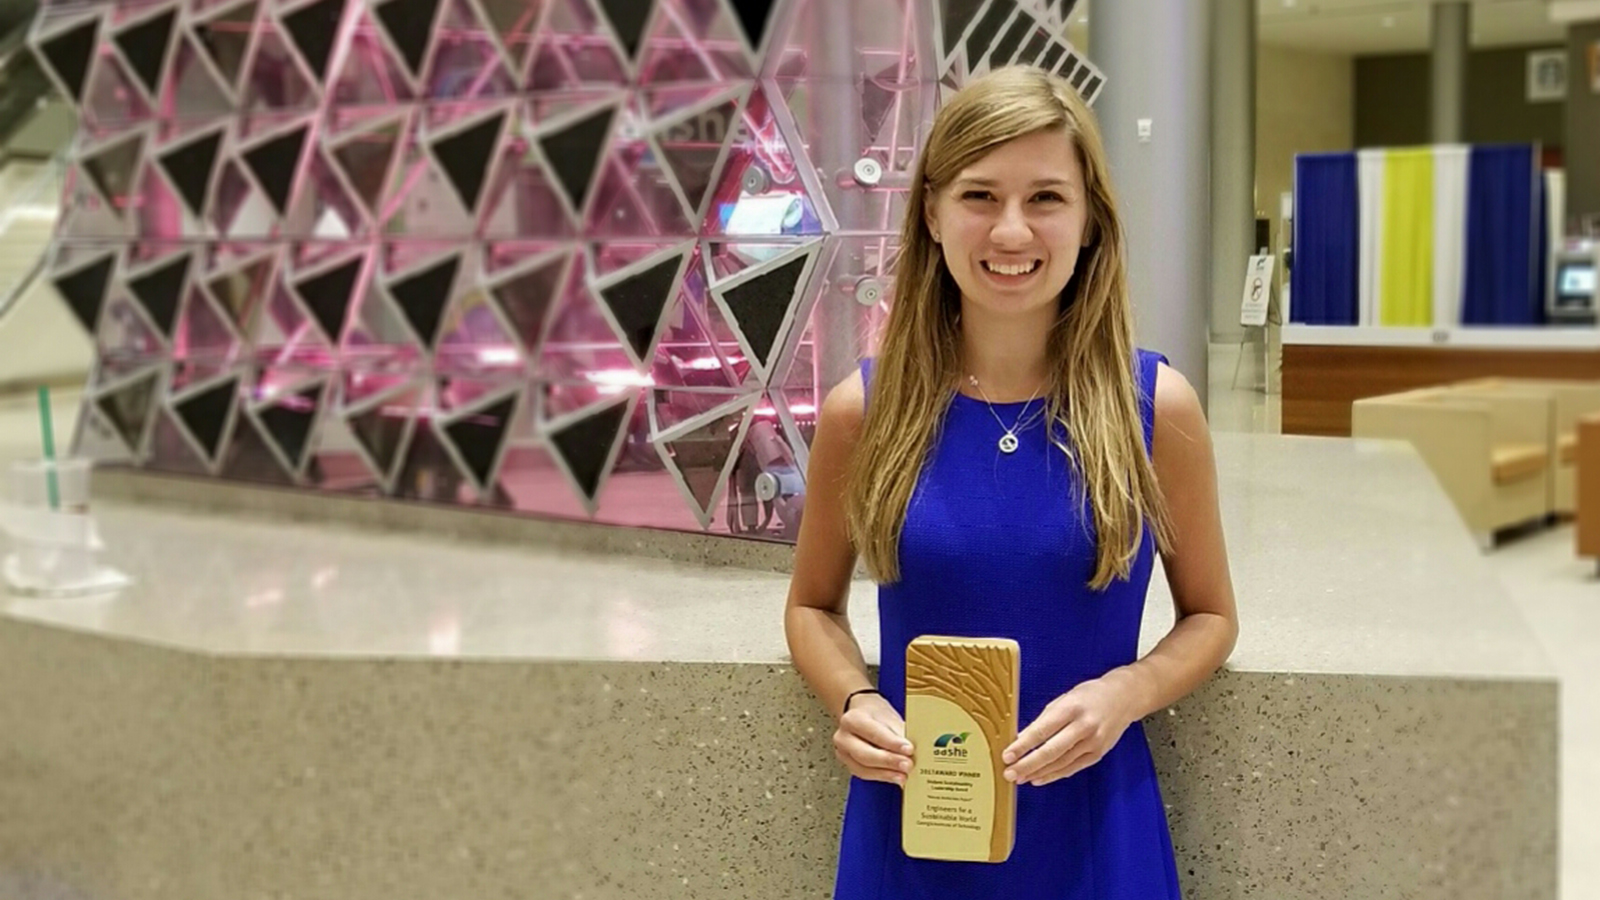 Grace Brosofsky, BSEnvE 2017, stands with her Student Sustainability Leadership award from the Association for the Advancement of Sustainability in Higher Education. She won the award for a project she created with Engineers for a Sustainable World at Georgia Tech researching natural weed-control options. (Photo Courtesy: Grace Brosofsky)